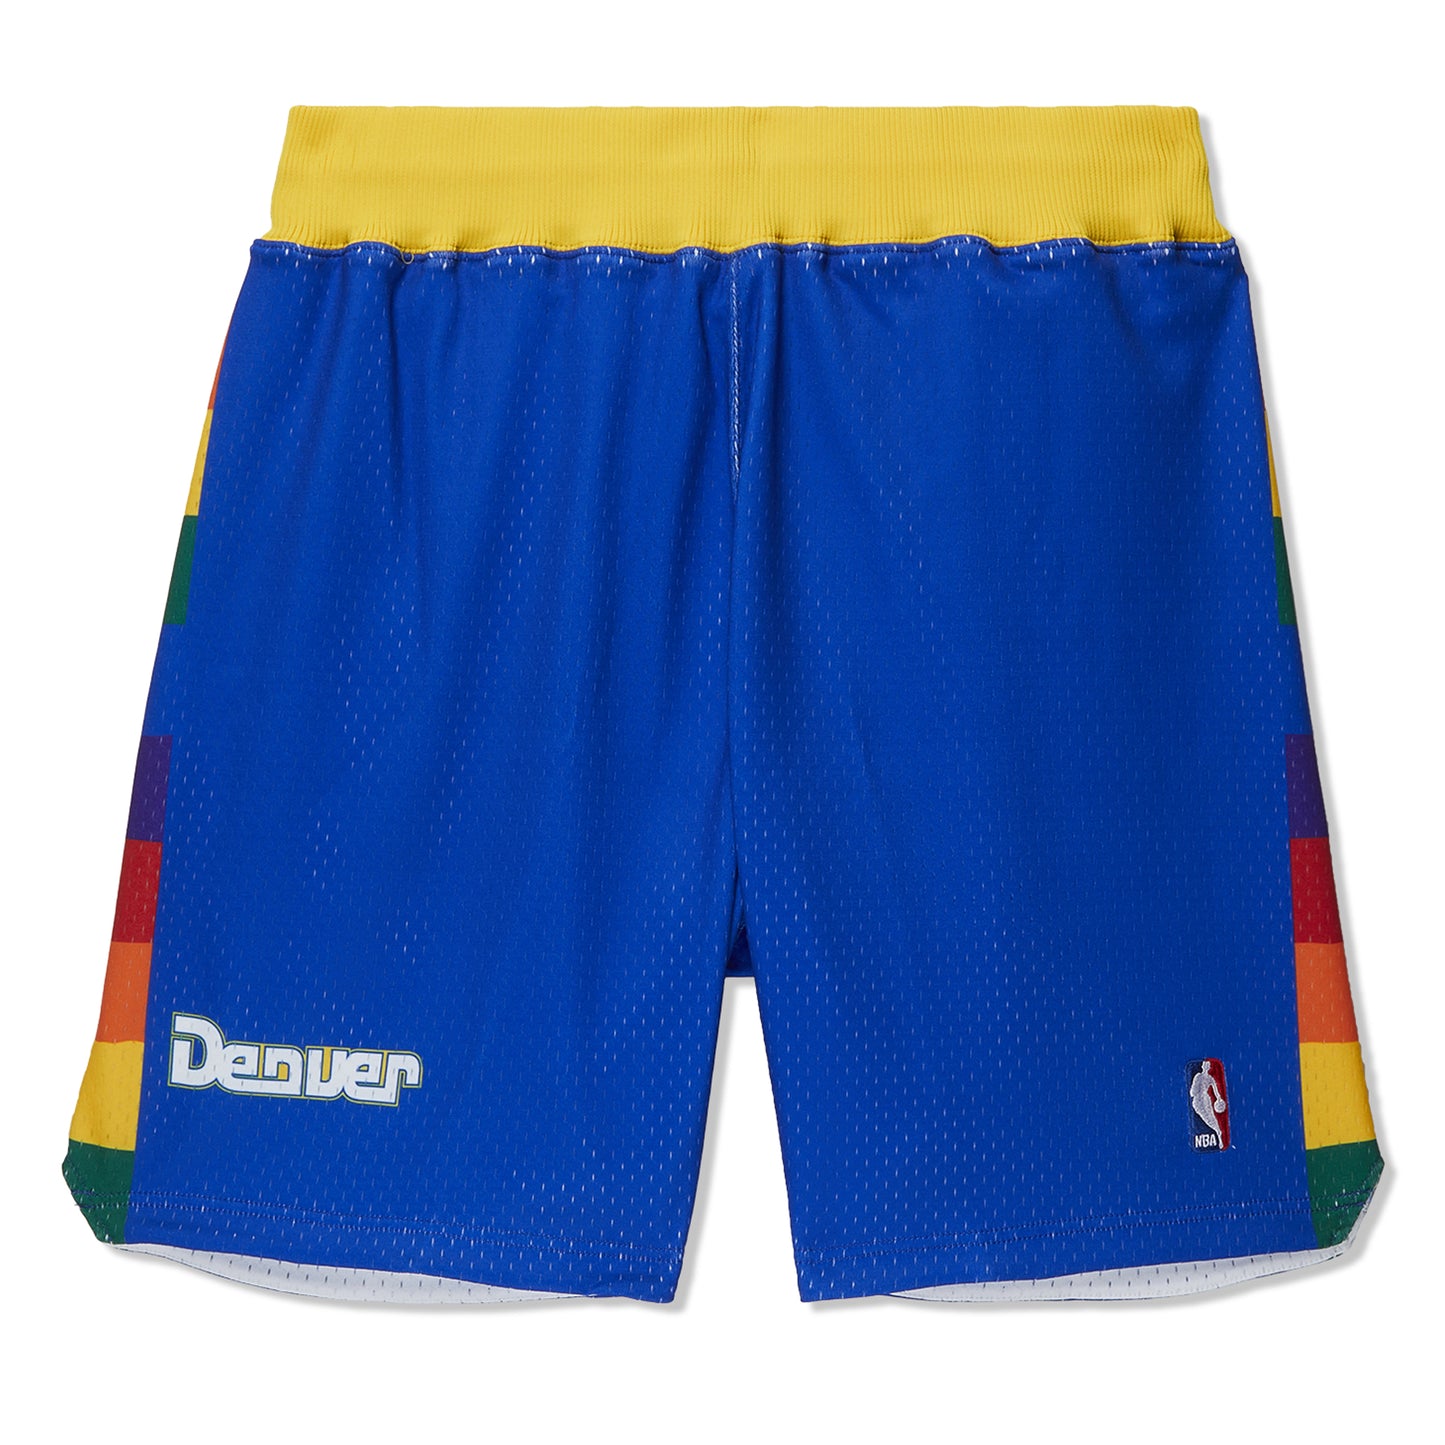 Mitchell & Ness Authentic Shorts  Denver Nuggets '91 (Blue)